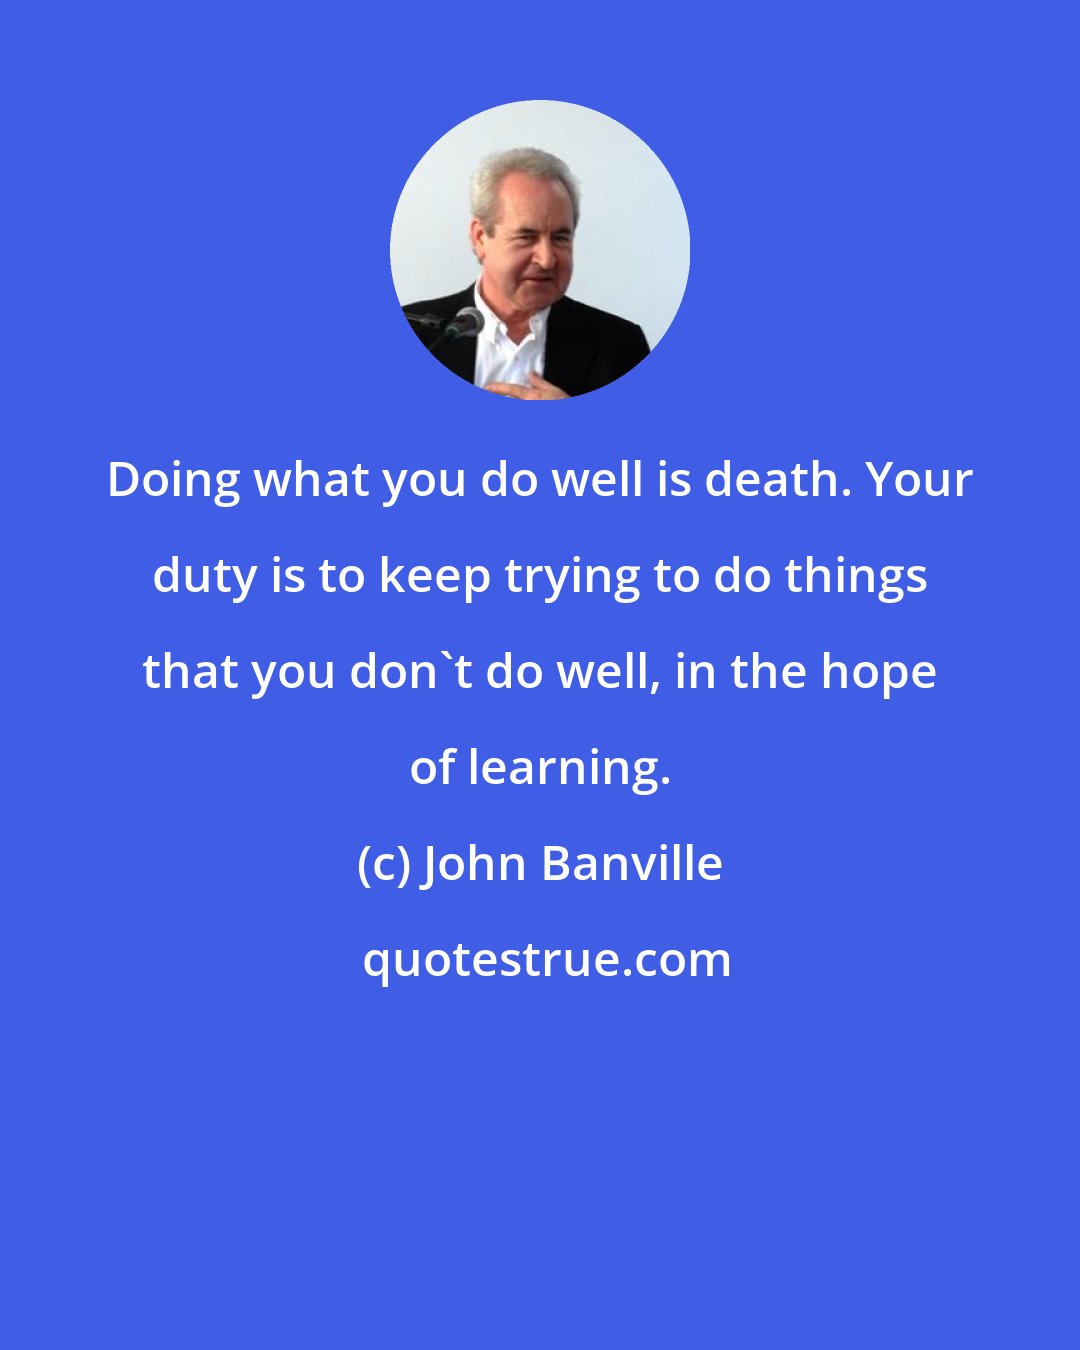 John Banville: Doing what you do well is death. Your duty is to keep trying to do things that you don't do well, in the hope of learning.